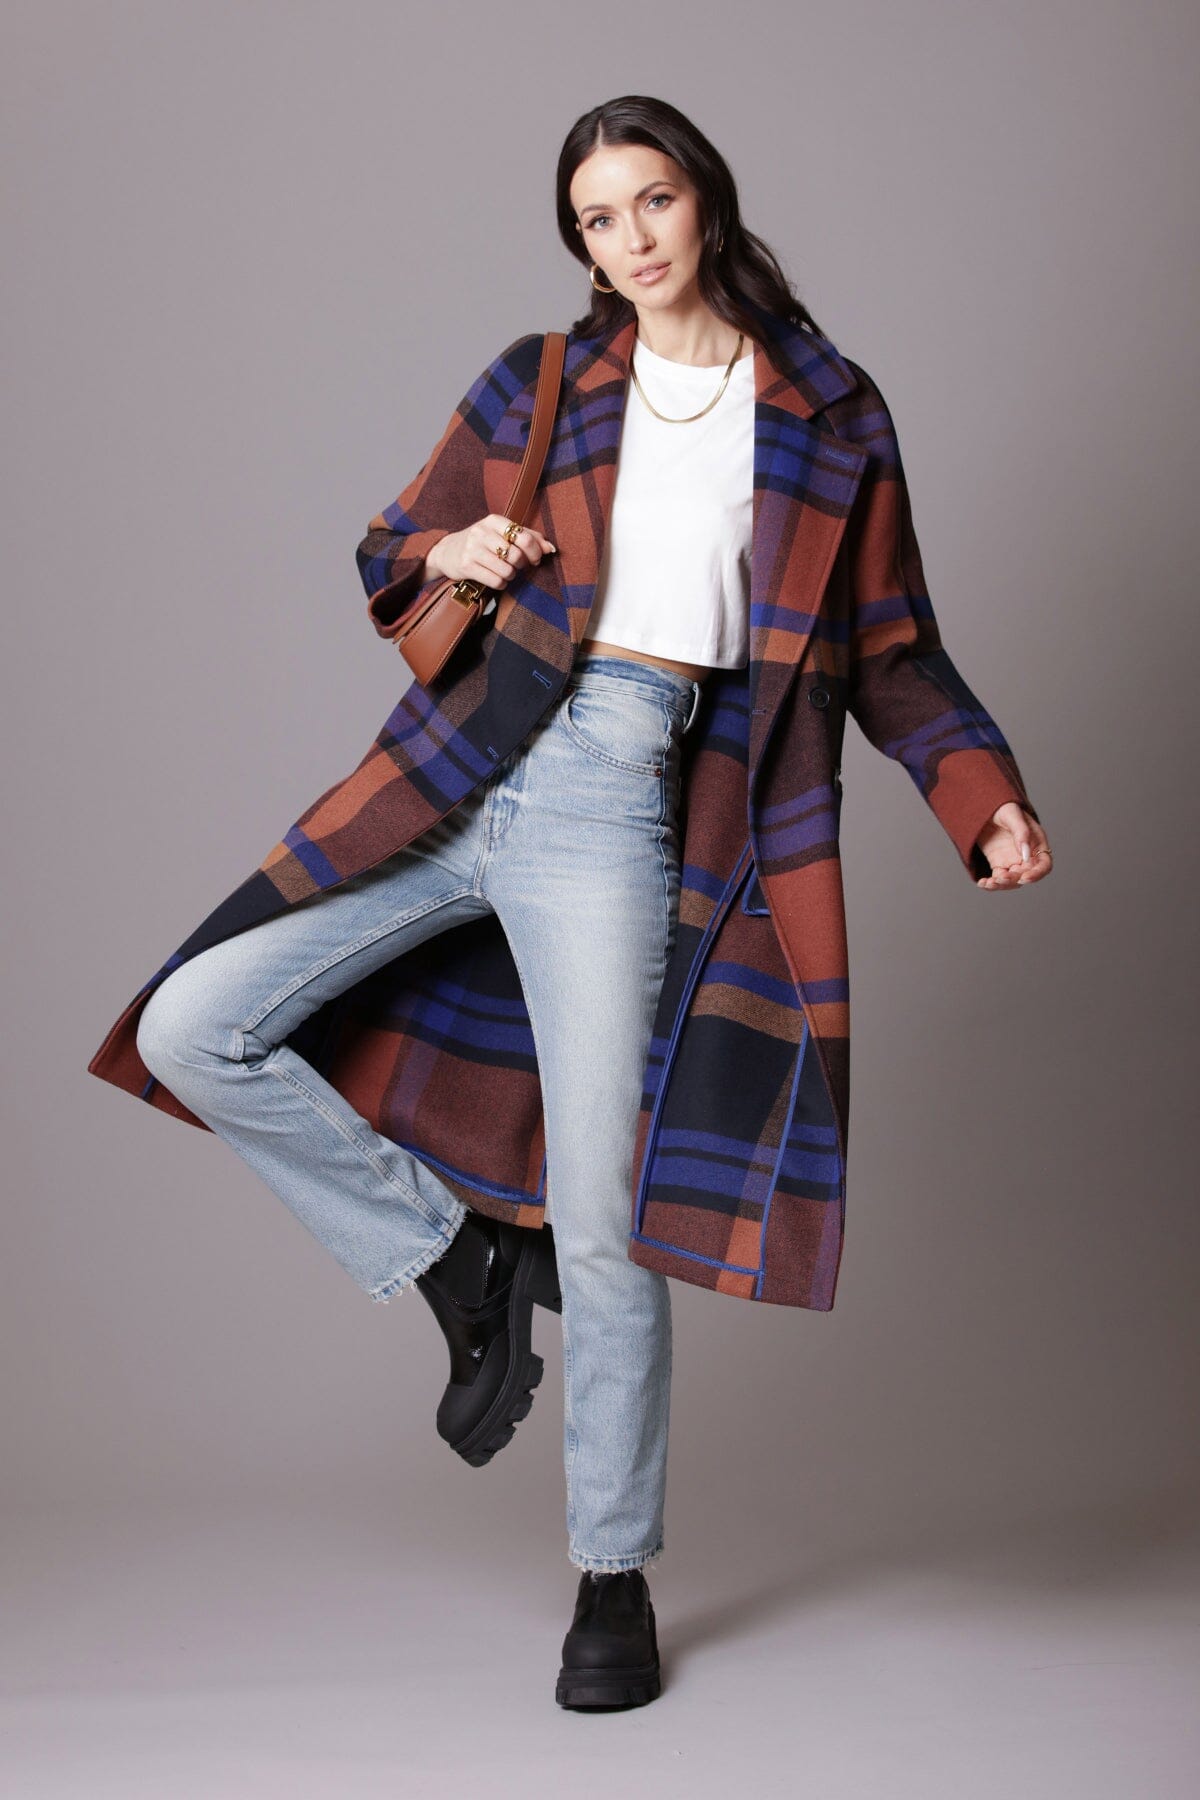 Rust orange and navy double-face plaid relaxed walker coat jacket - figure flattering stylish Fall coats jackets outerwear for women by Avec Les Filles